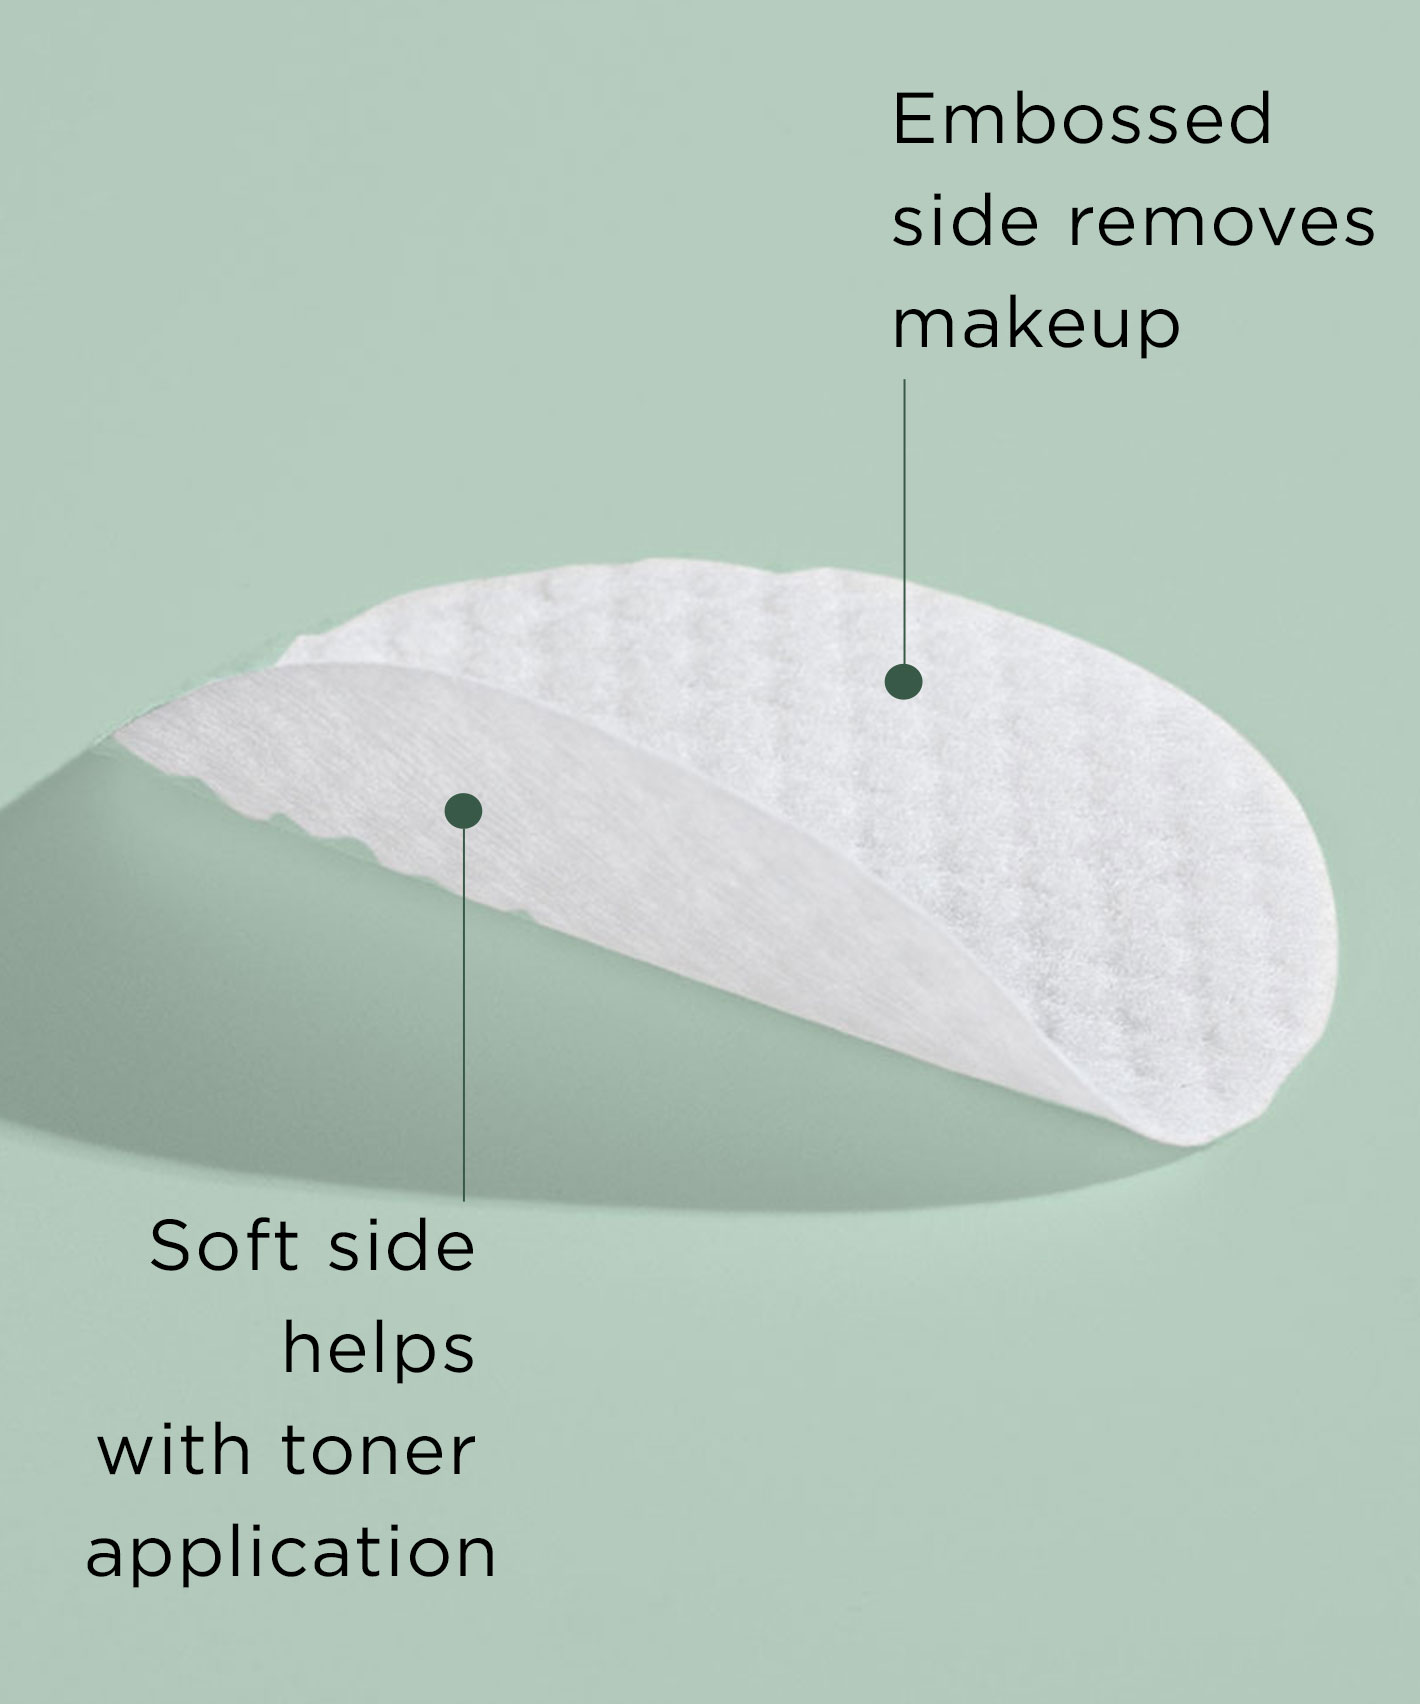 One The Face Shop Toner Pad bent in half lying on a ligth green surface and two phrases attached to it: "Embosed side removes makeup" and "Soft side helps with toner application"